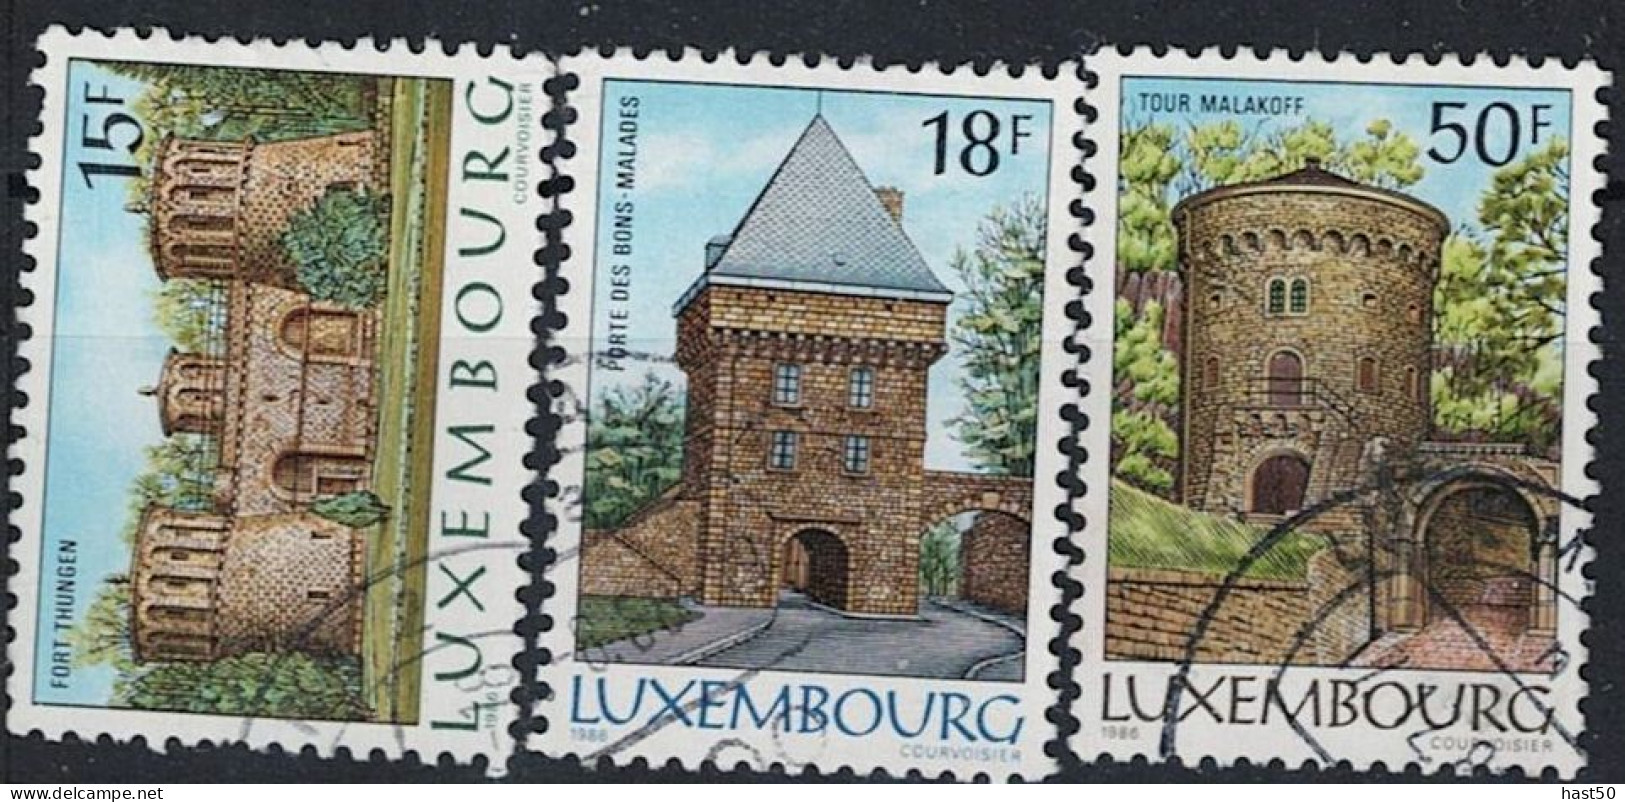 Luxemburg - Festung Luxemburg (MiNr: 1153/5 X) 1986 - Gest Used Obl - Used Stamps